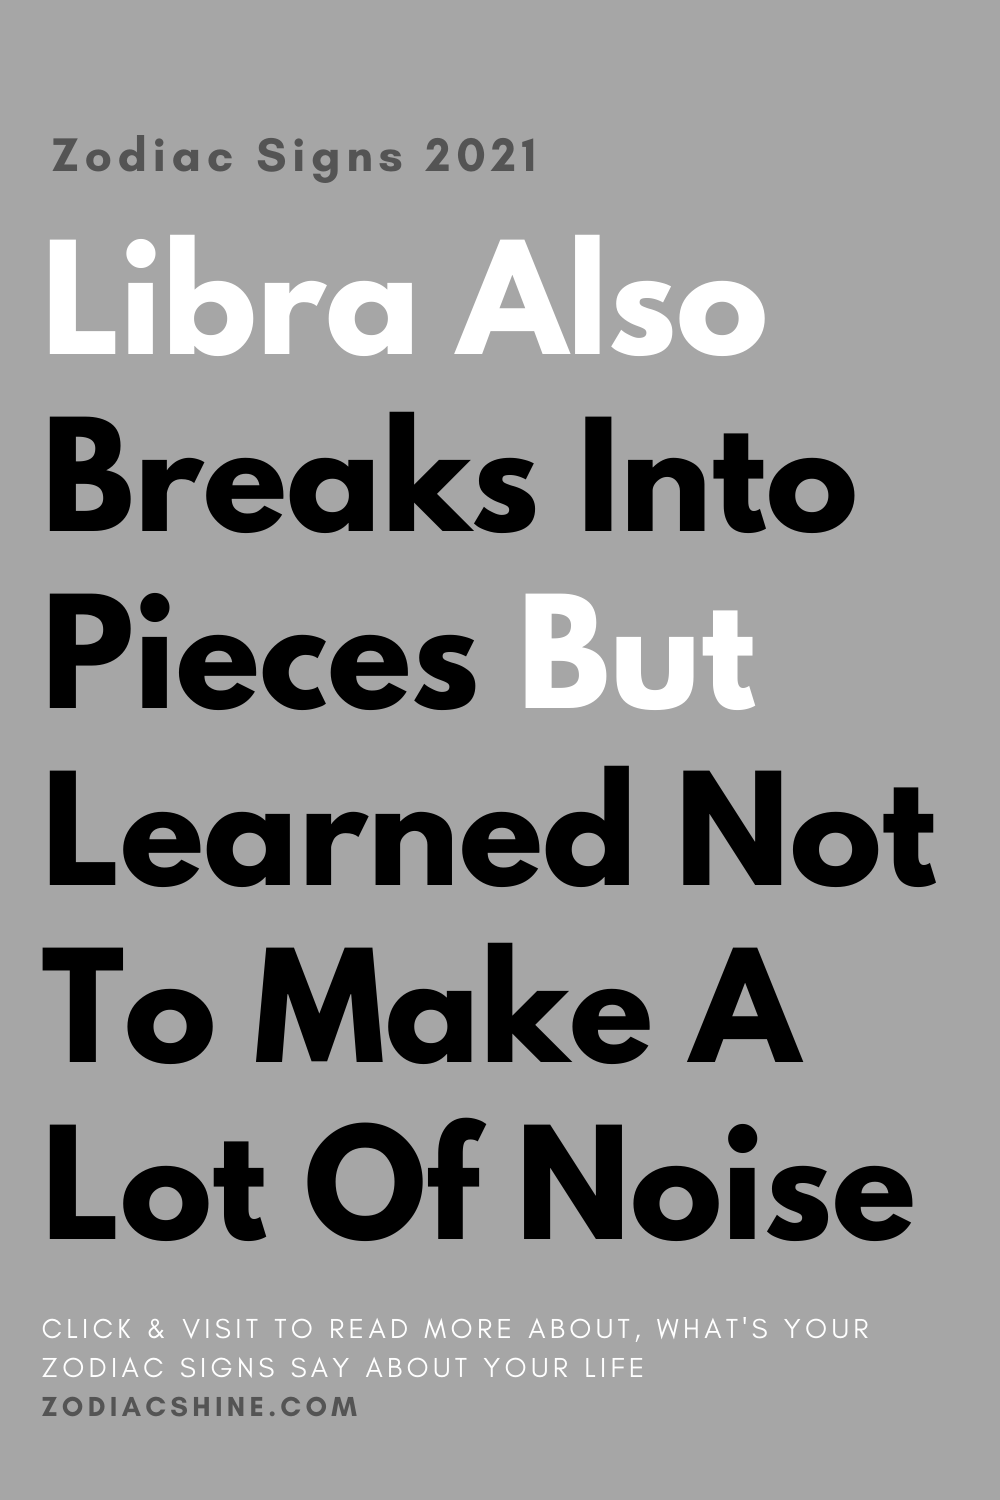 Libra Also Breaks Into Pieces But Learned Not To Make A Lot Of Noise